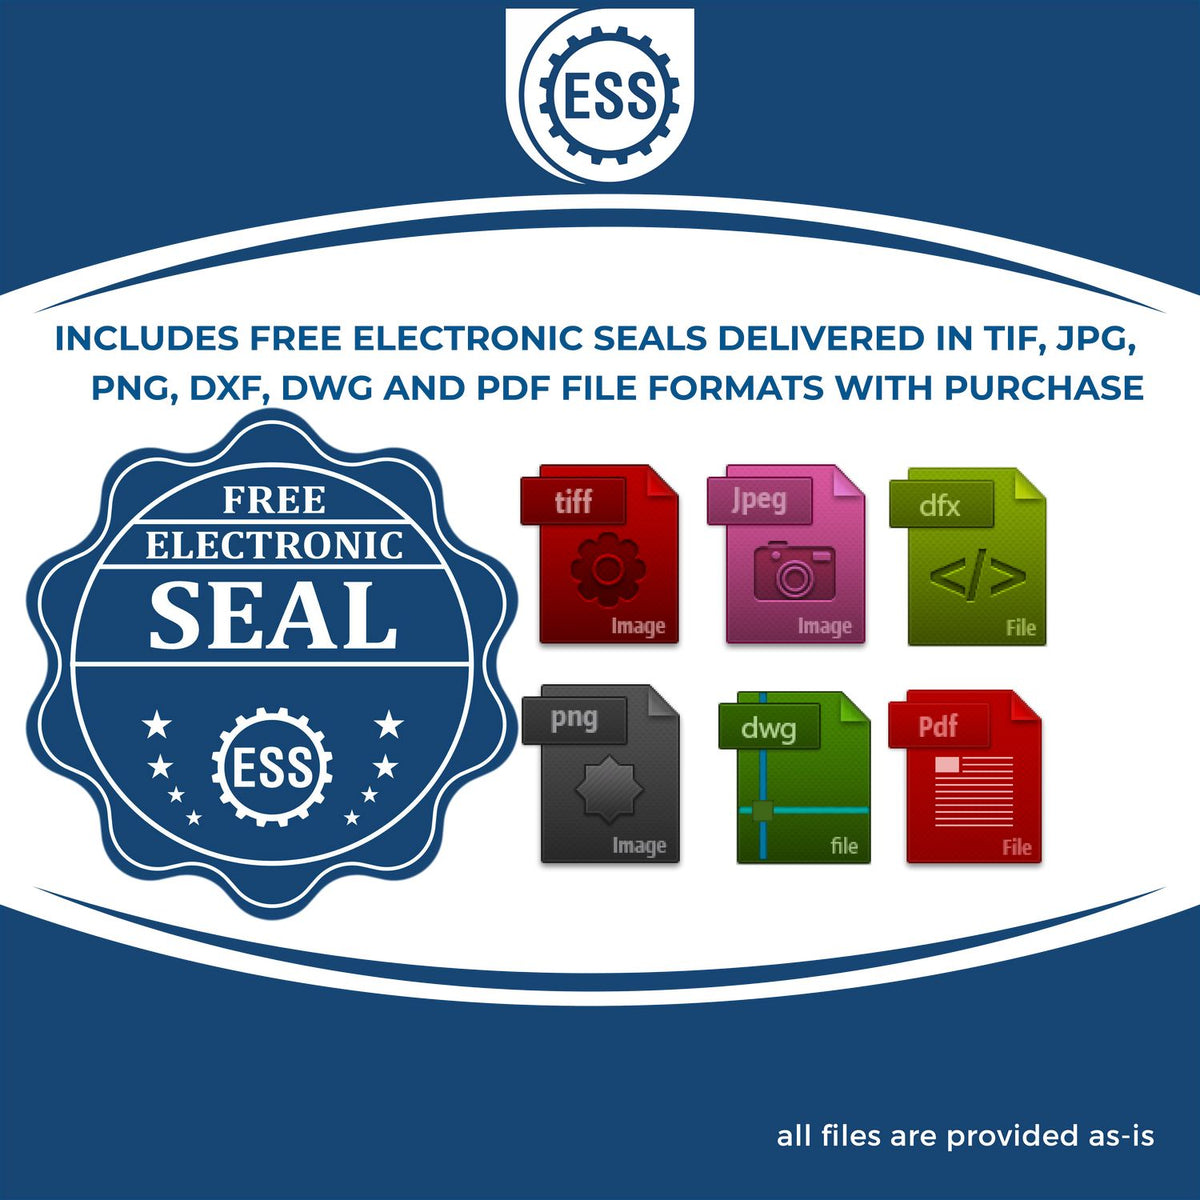 An infographic for the free electronic seal for the Slim Pre-Inked Montana Landscape Architect Seal Stamp illustrating the different file type icons such as DXF, DWG, TIF, JPG and PNG.